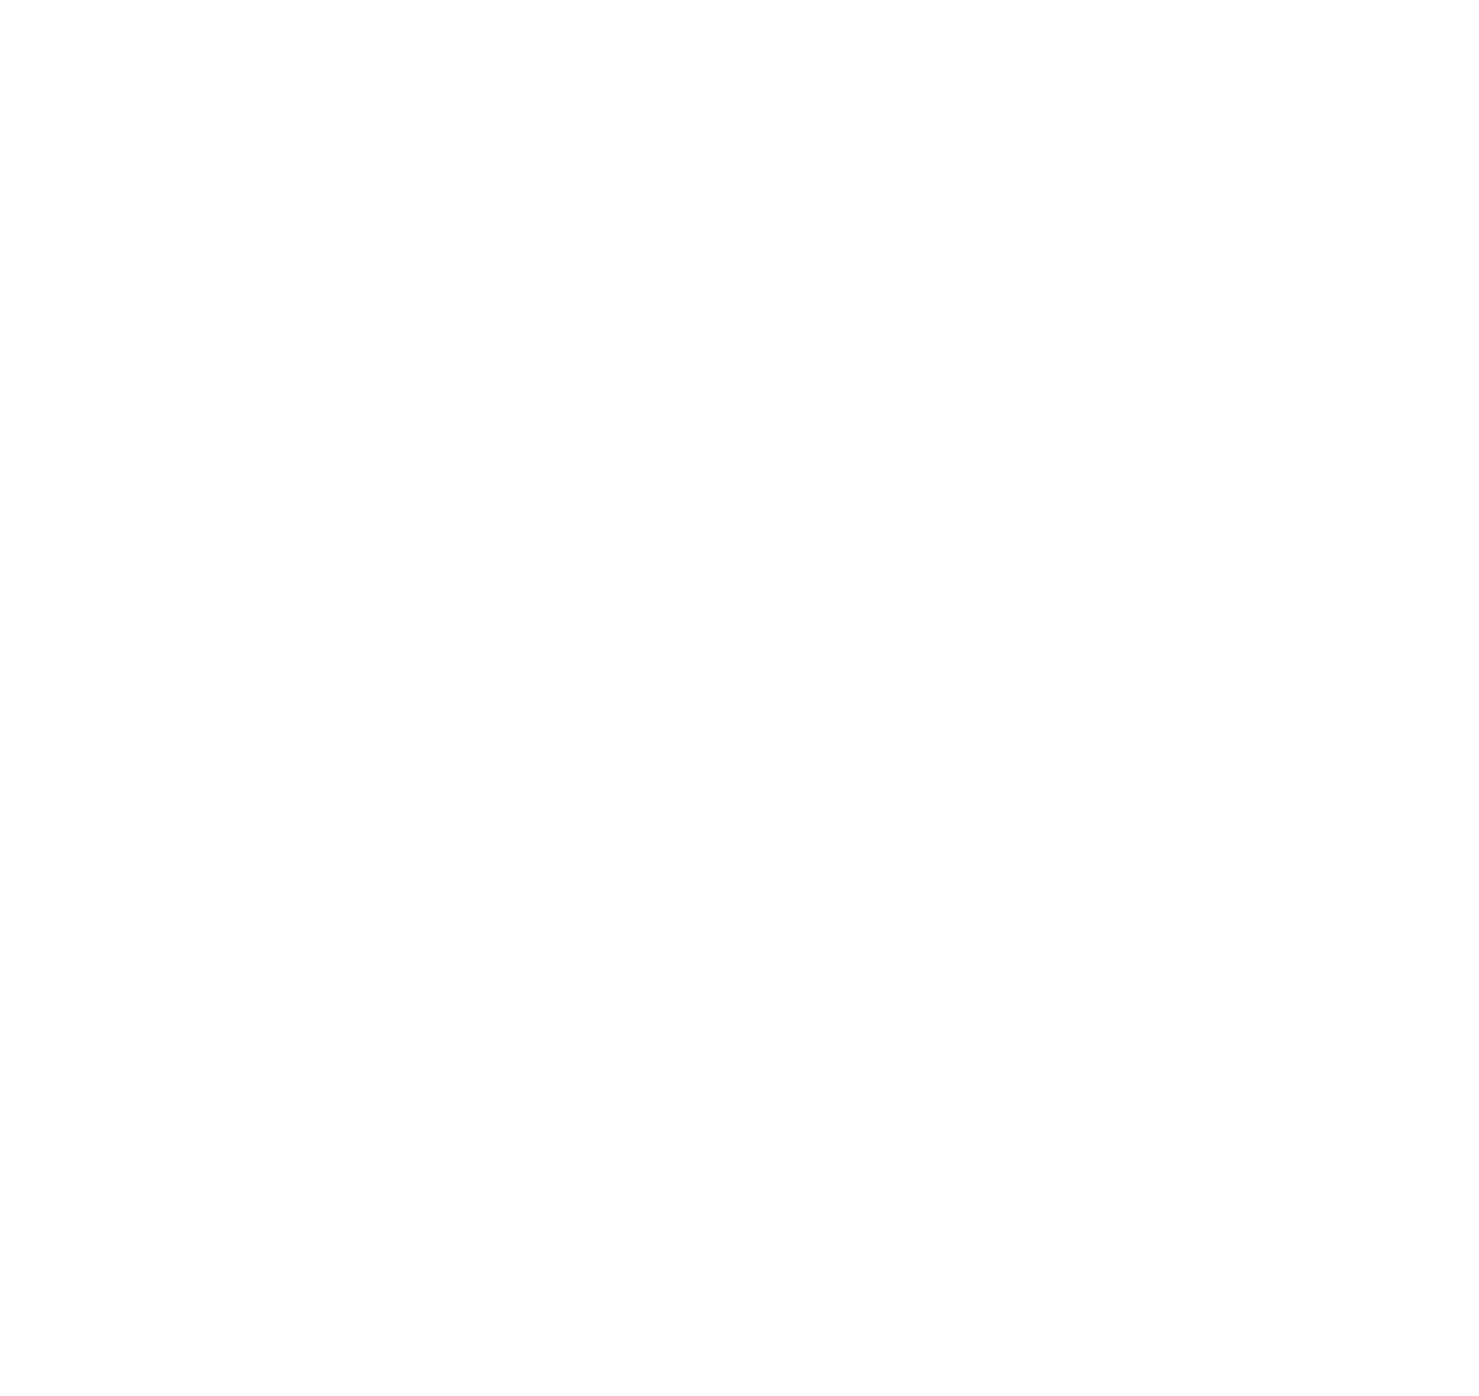 Straight Ace Sports